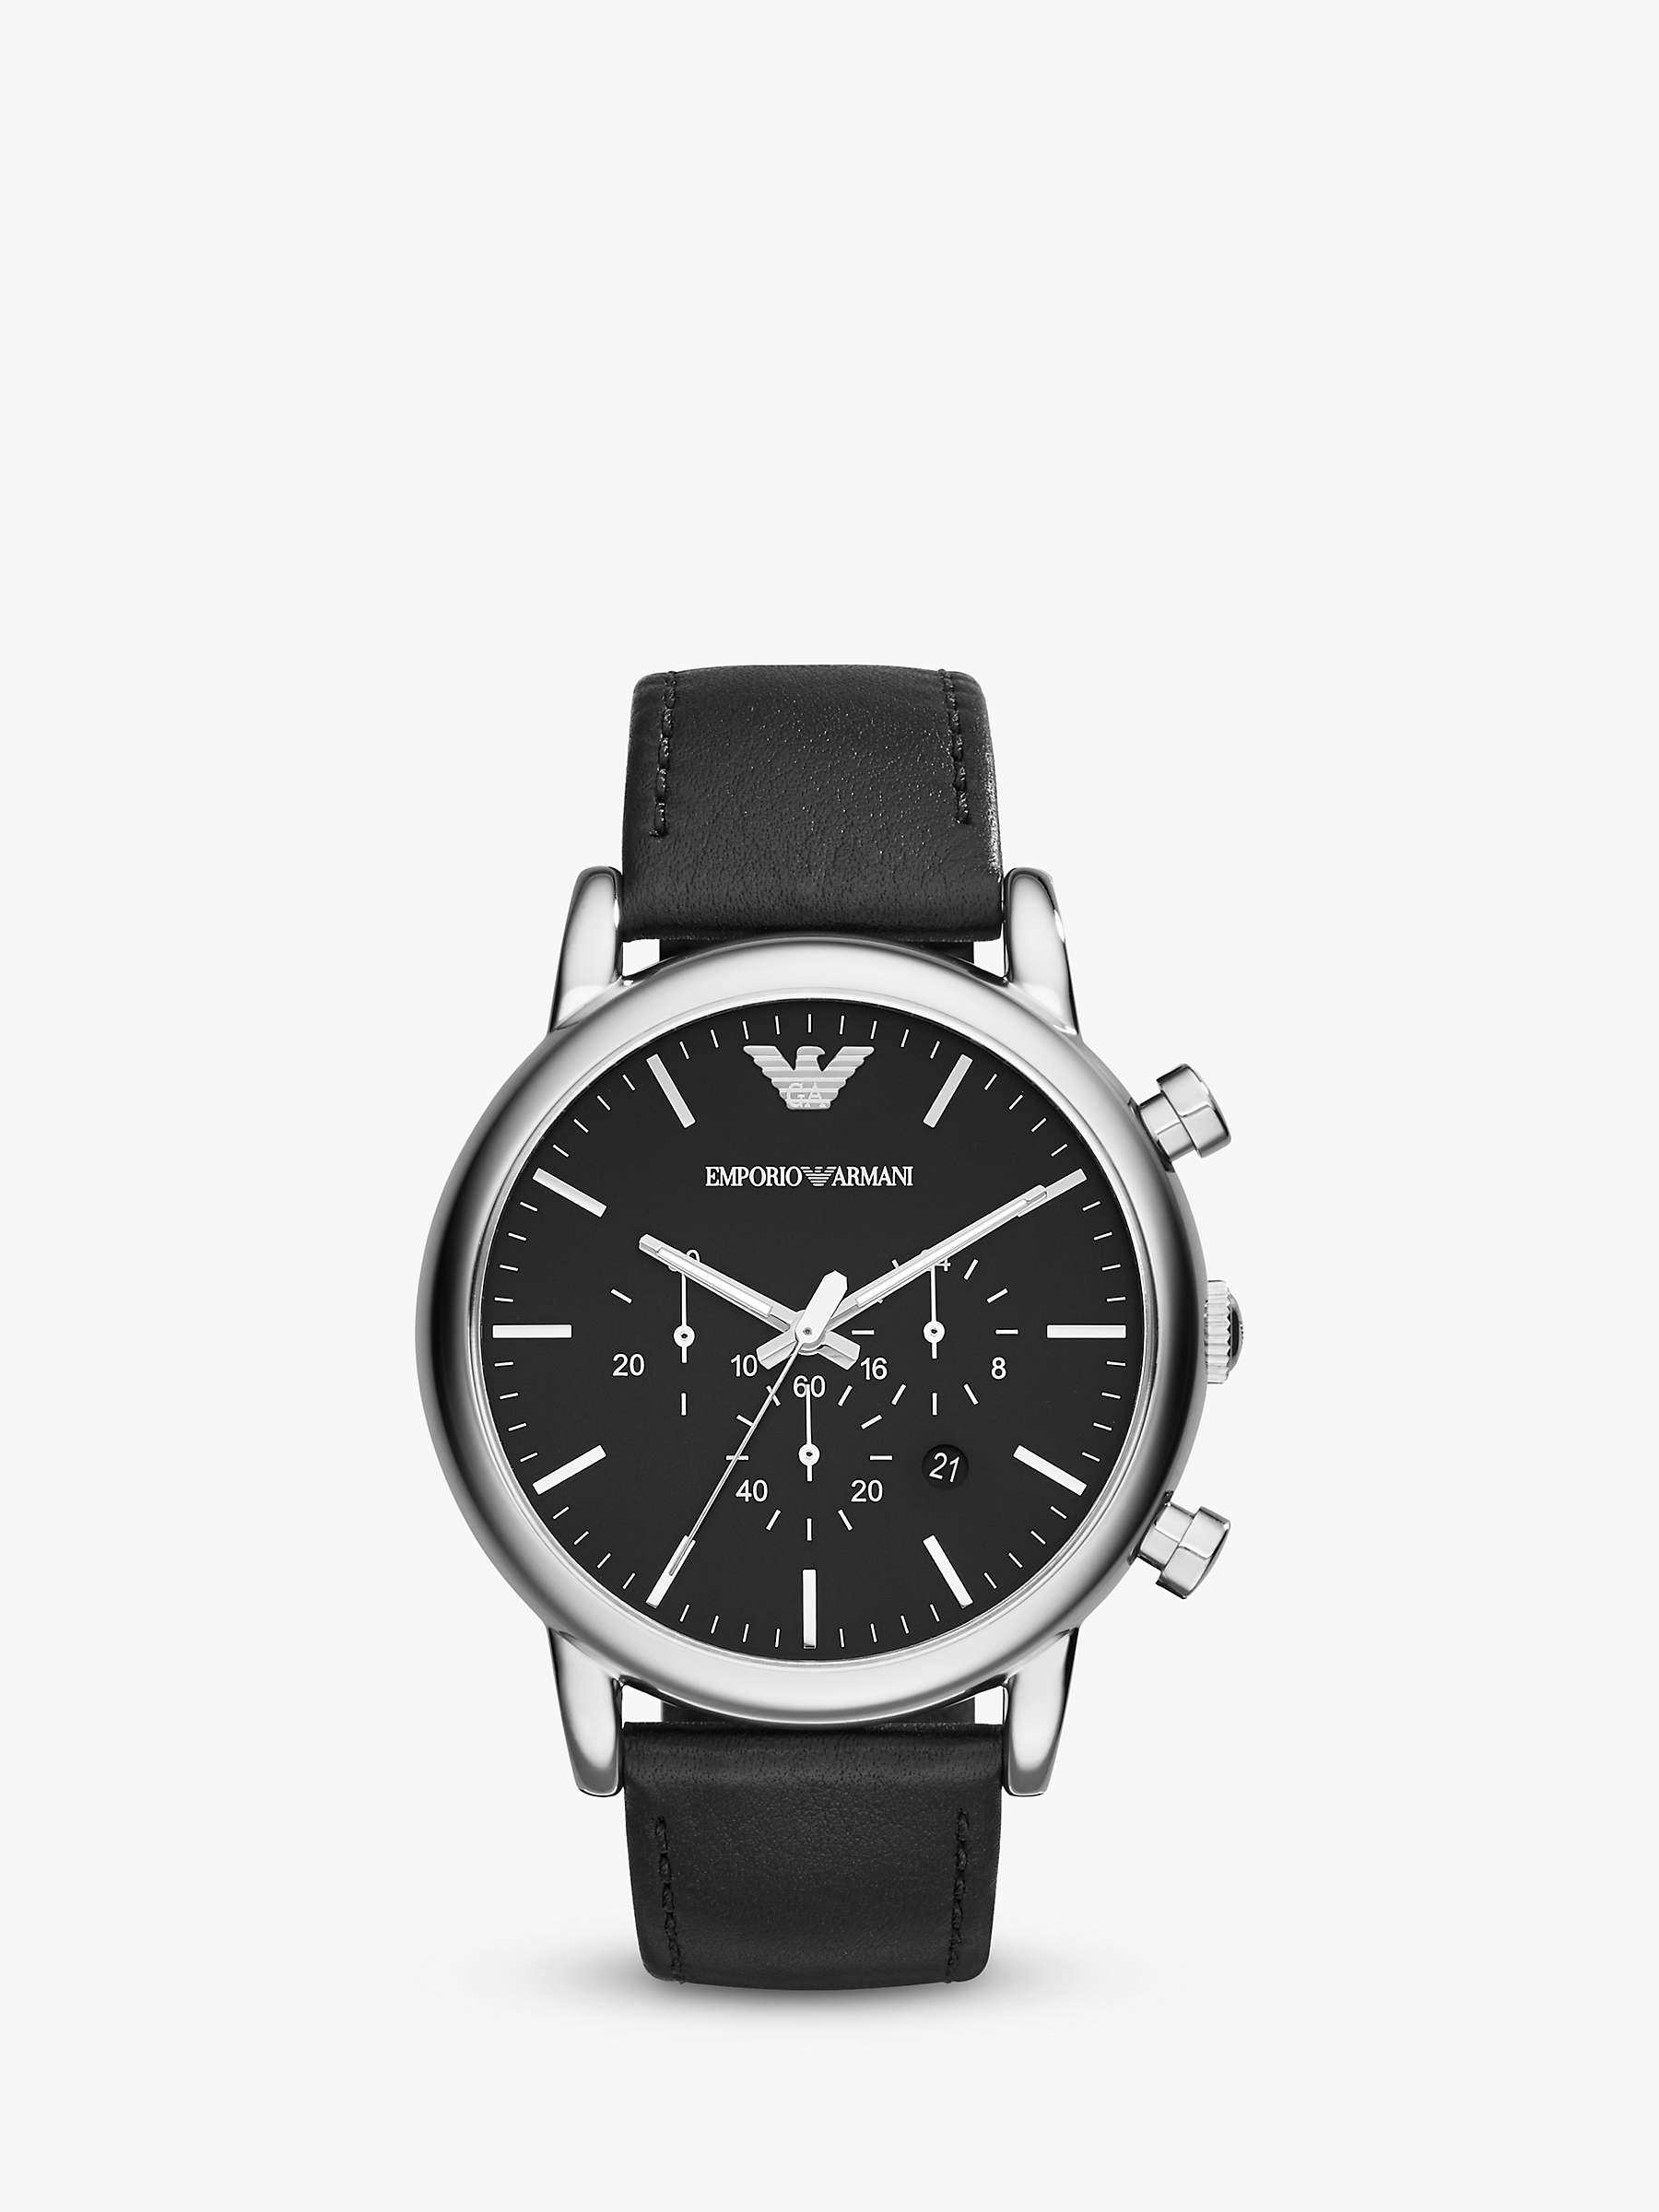 Buy Emporio Armani AR1828 Men's Chronograph Date Leather Strap Watch, Black Online at johnlewis.com